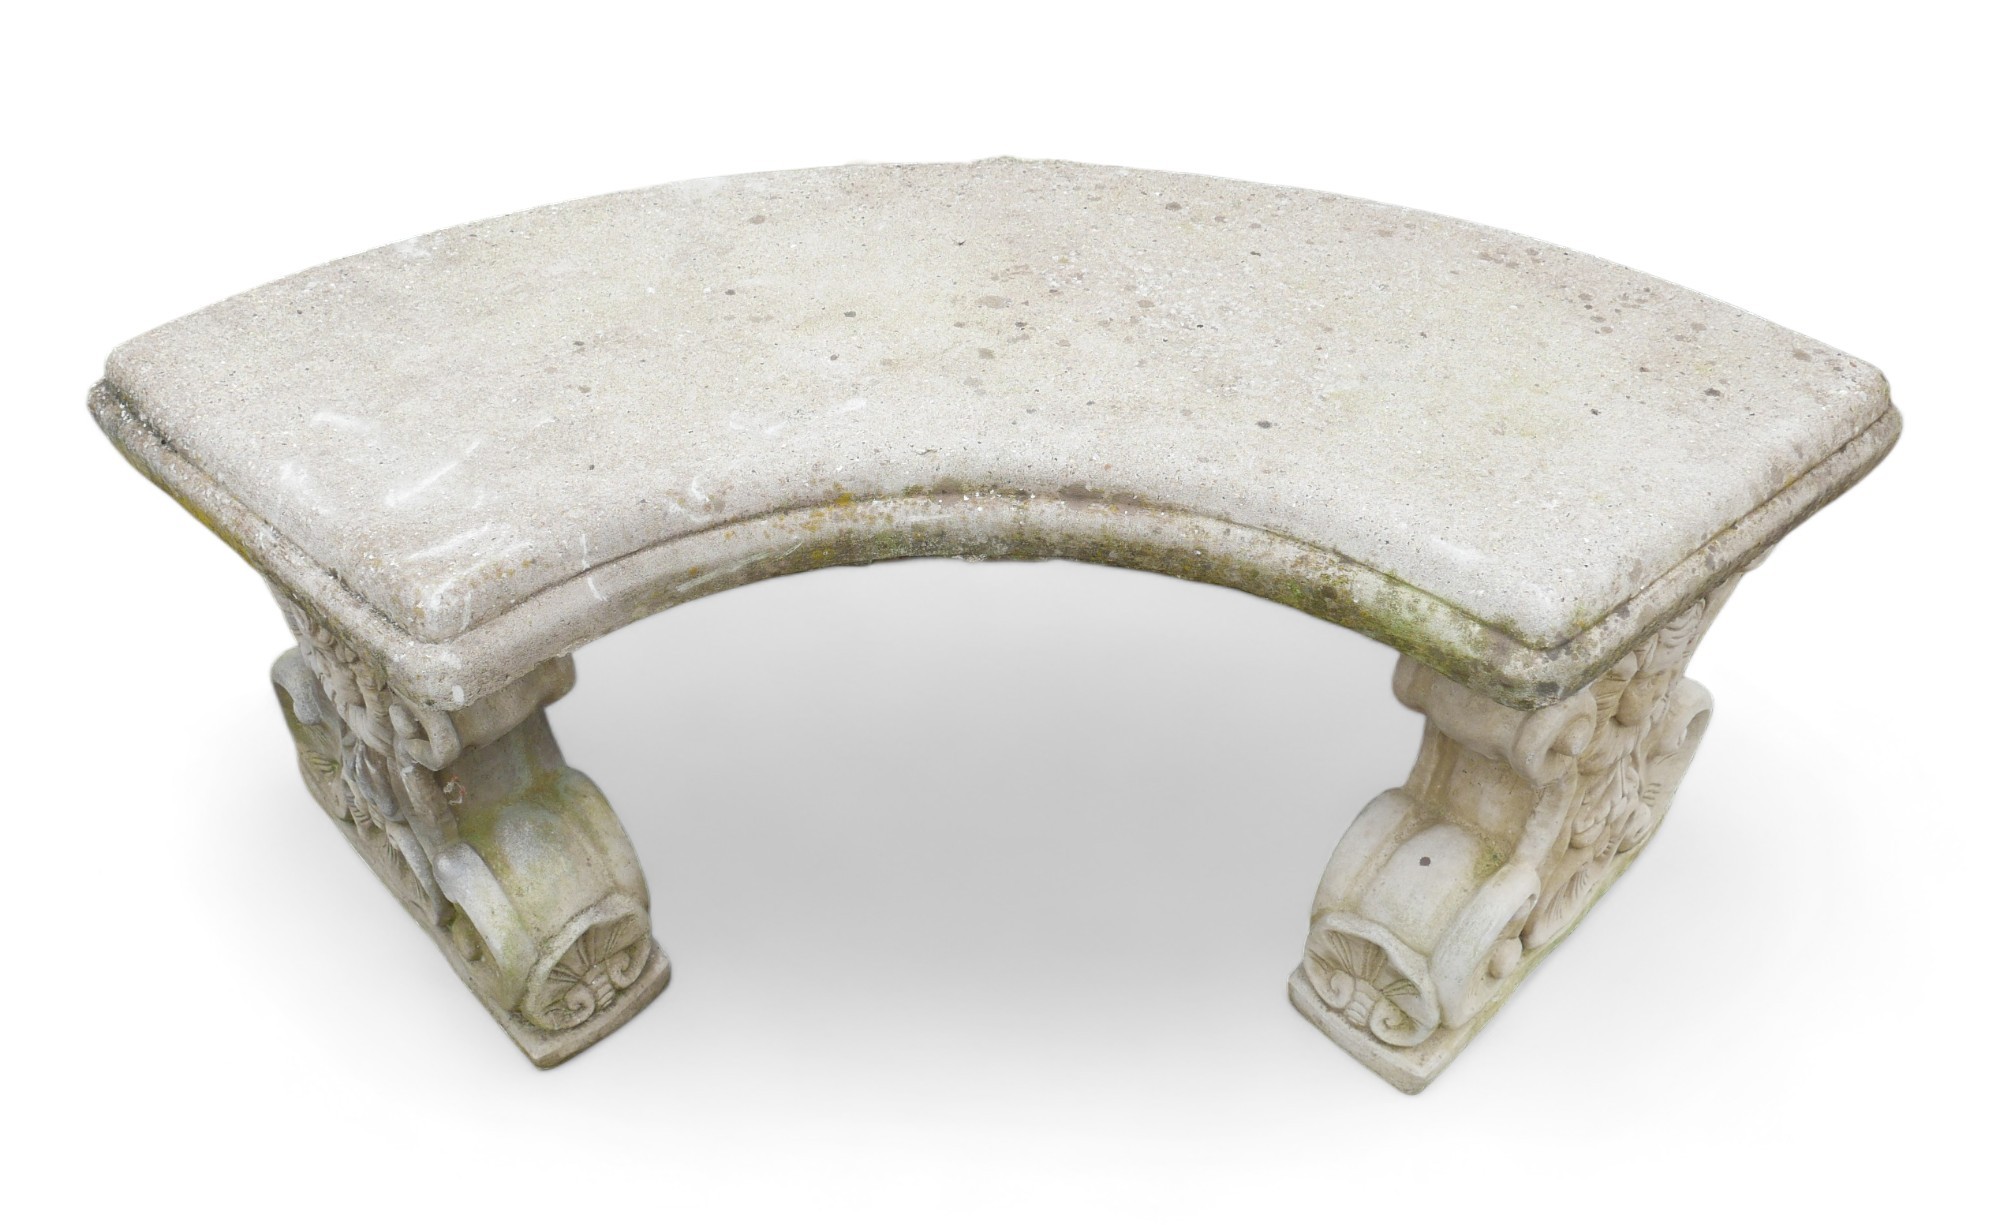 A cast concrete garden bench, with pedestal bases, 106 by 44 by 45cm high. - Image 3 of 5